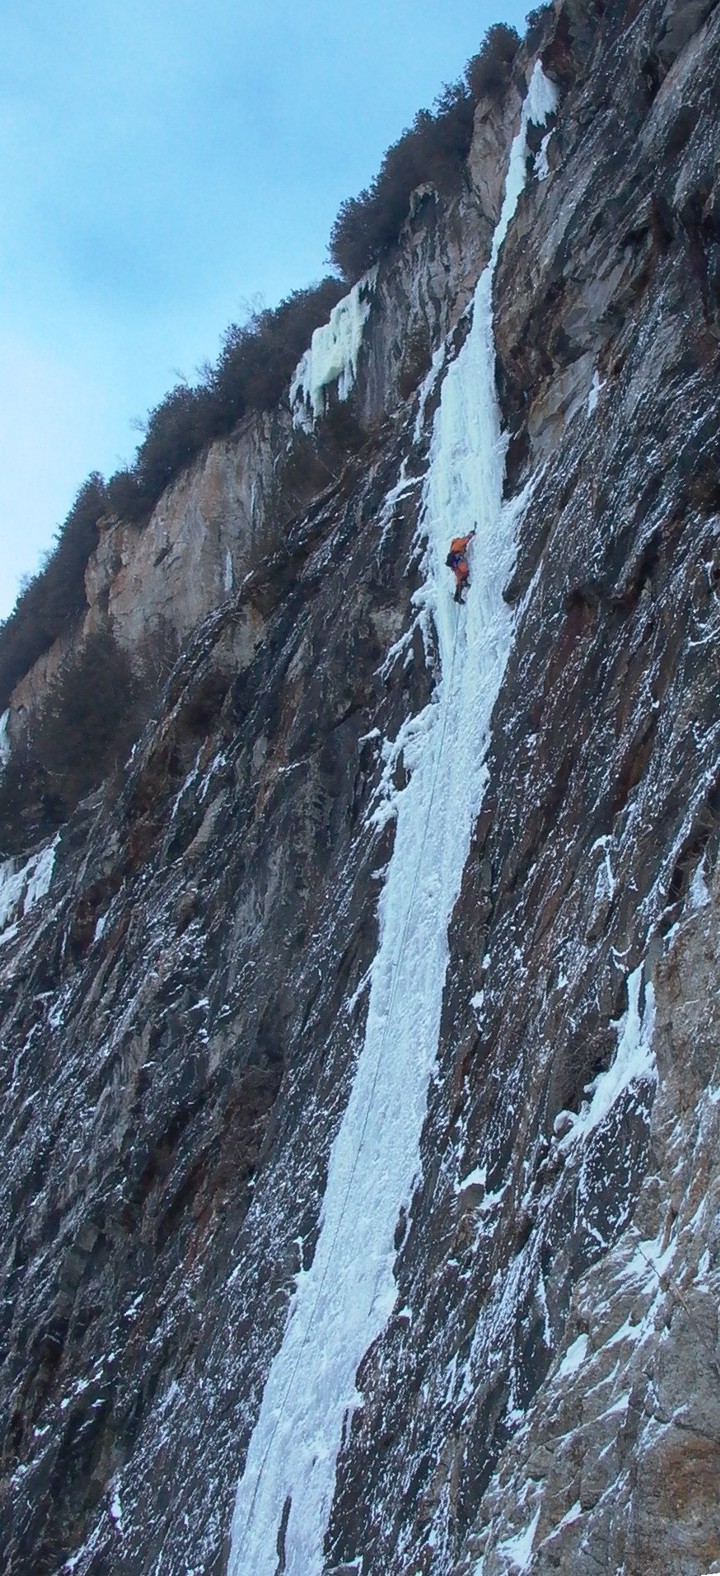 The crux of the route climbs is the steeper section of ice just below the cave belay